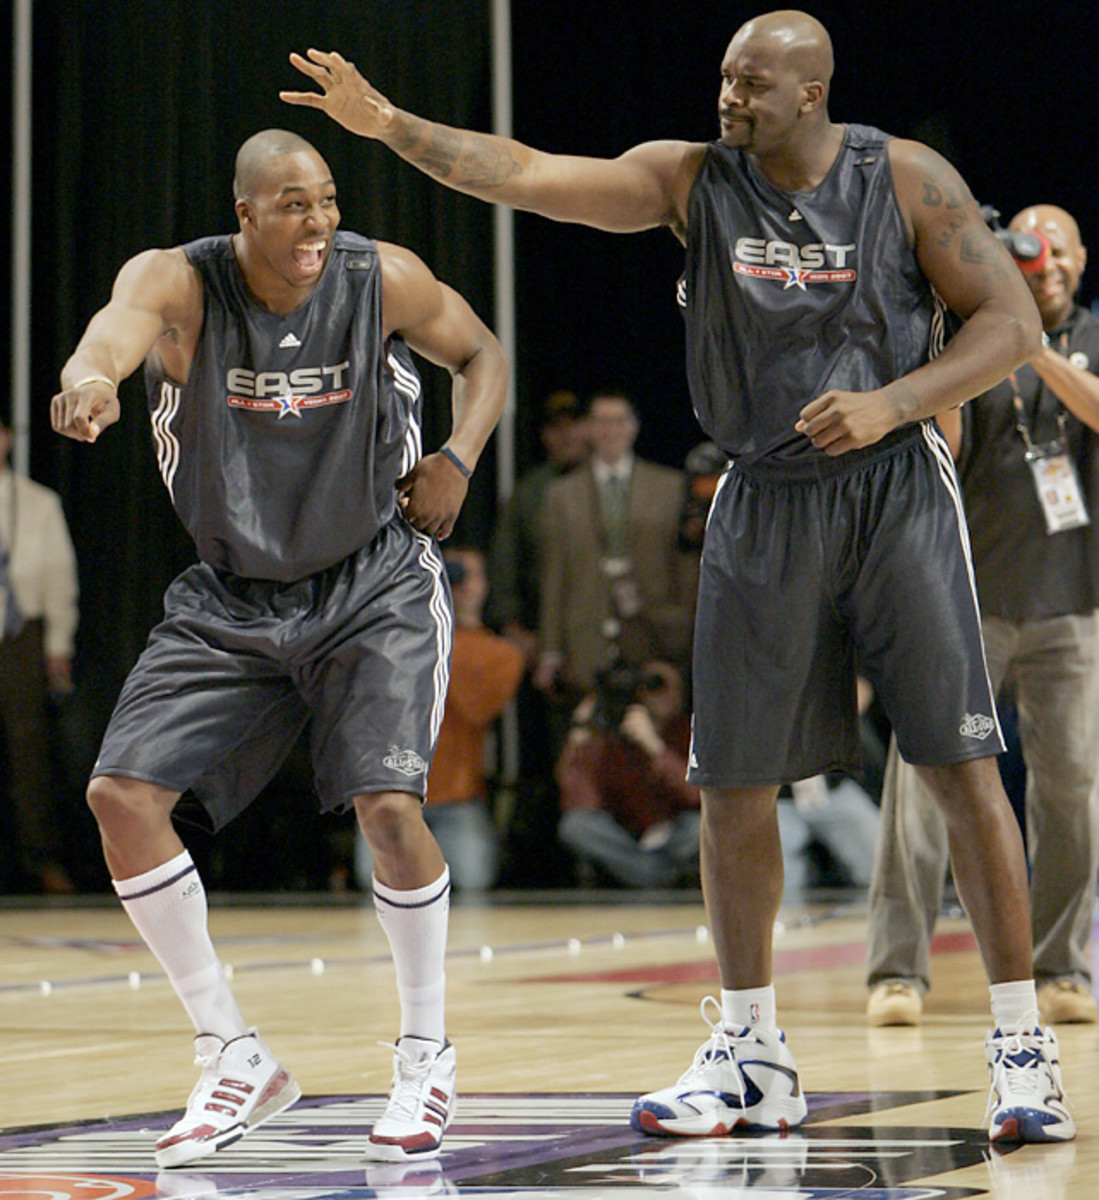 Dwight Howard and Shaquille O'Neal